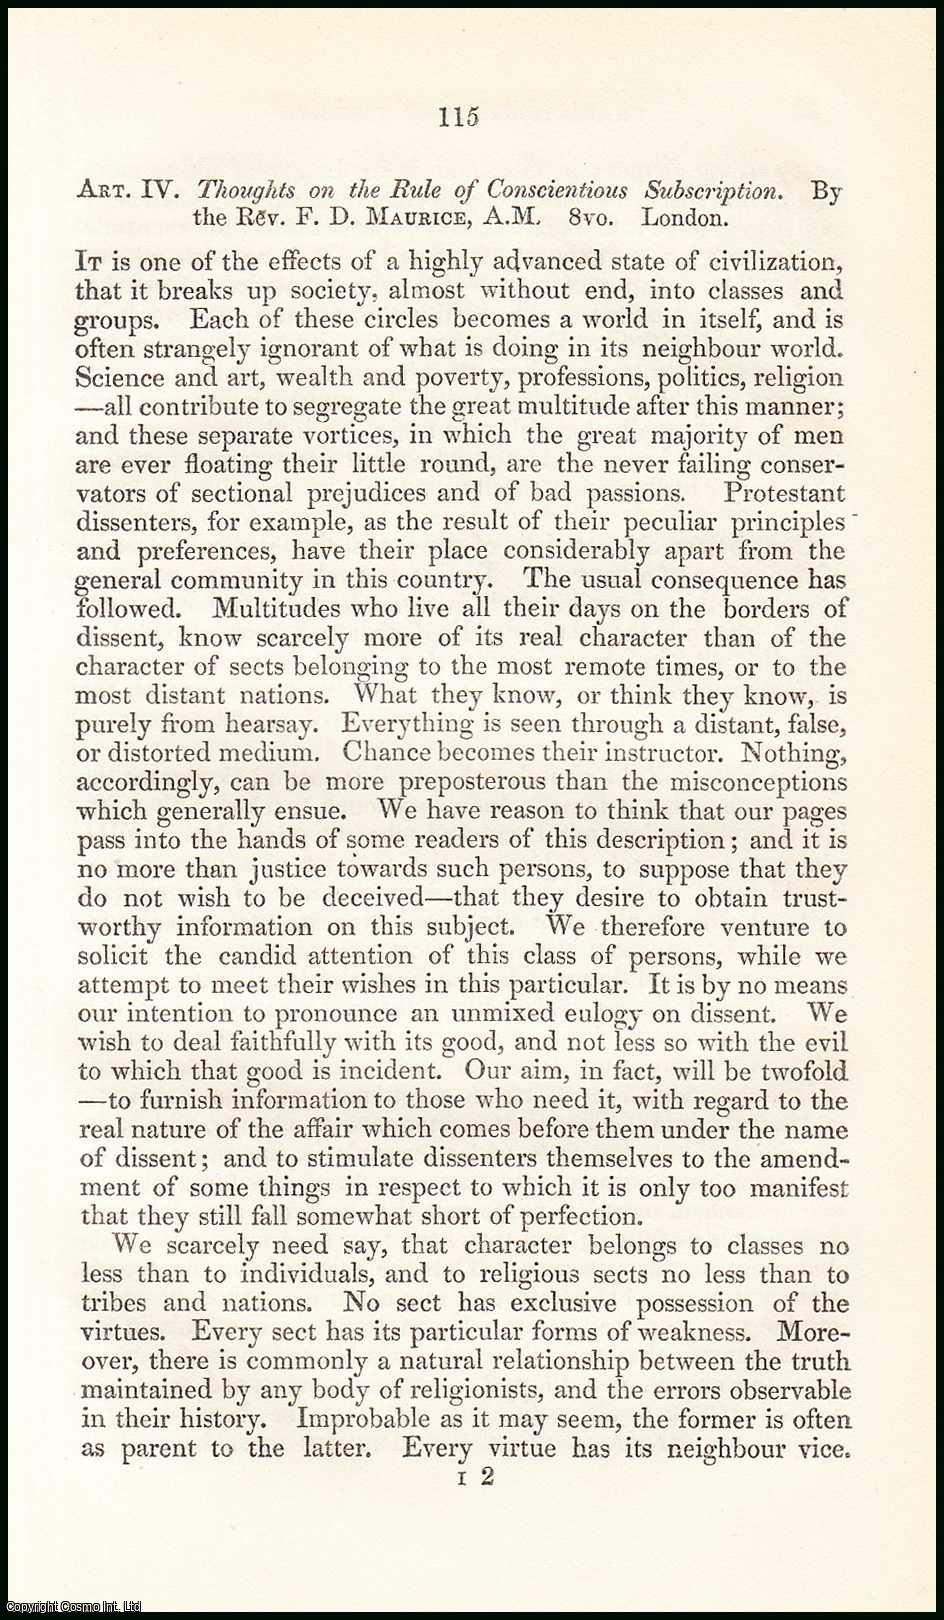 Robert Vaughan - Characteristics of Dissent : Dissent as a Protest ; Dissent its Self-Denial ; Dissent in its Relation to Spirituality, etc. A rare original article from the British Quarterly Review, 1847.